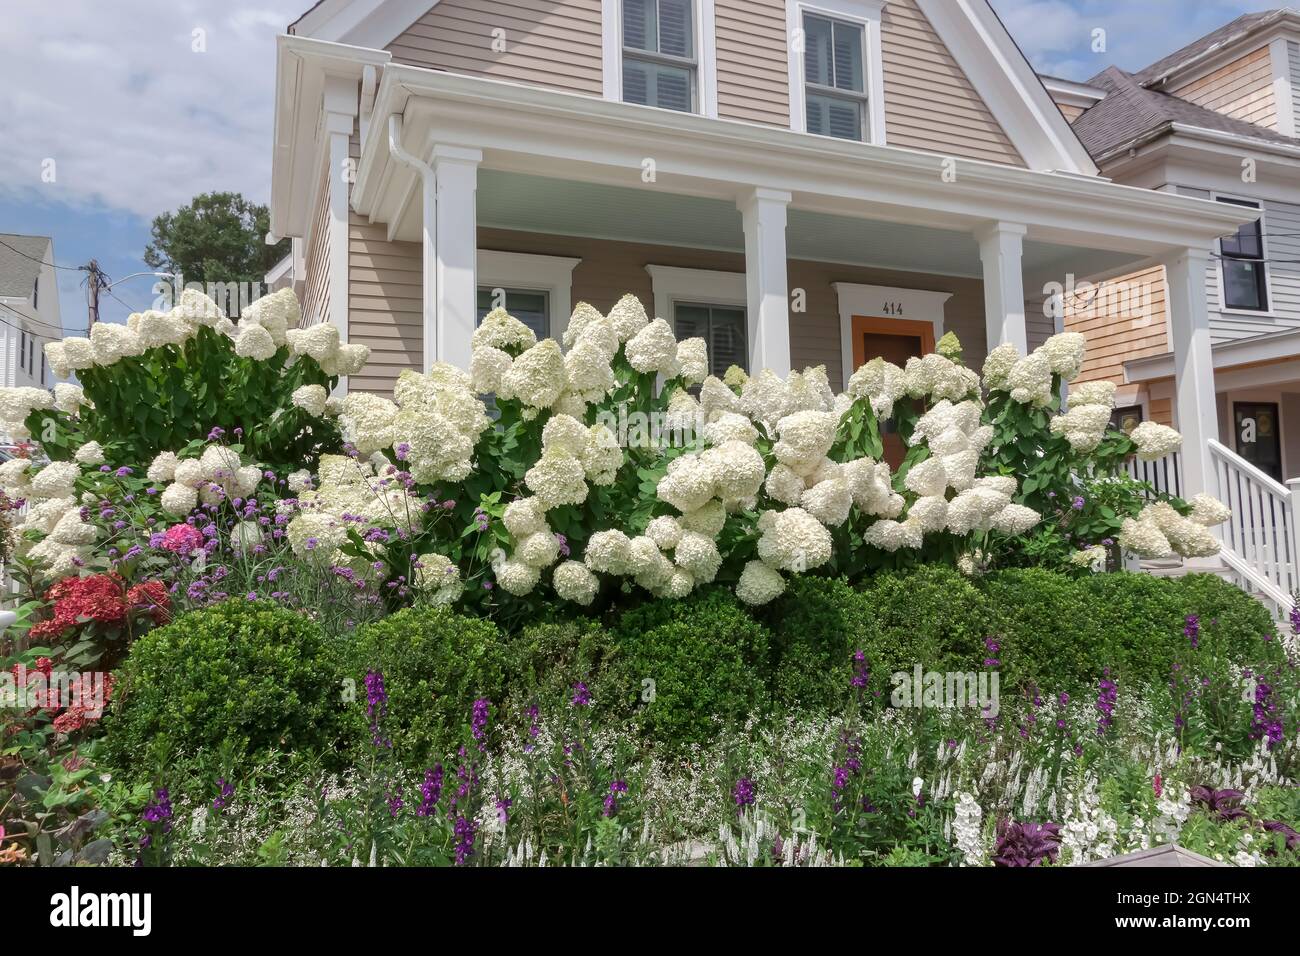 White hydrangea (hydrangea paniculata) bushes growing in the front yard of a house in Cape Cod, Massachusetts, USA. Stock Photo